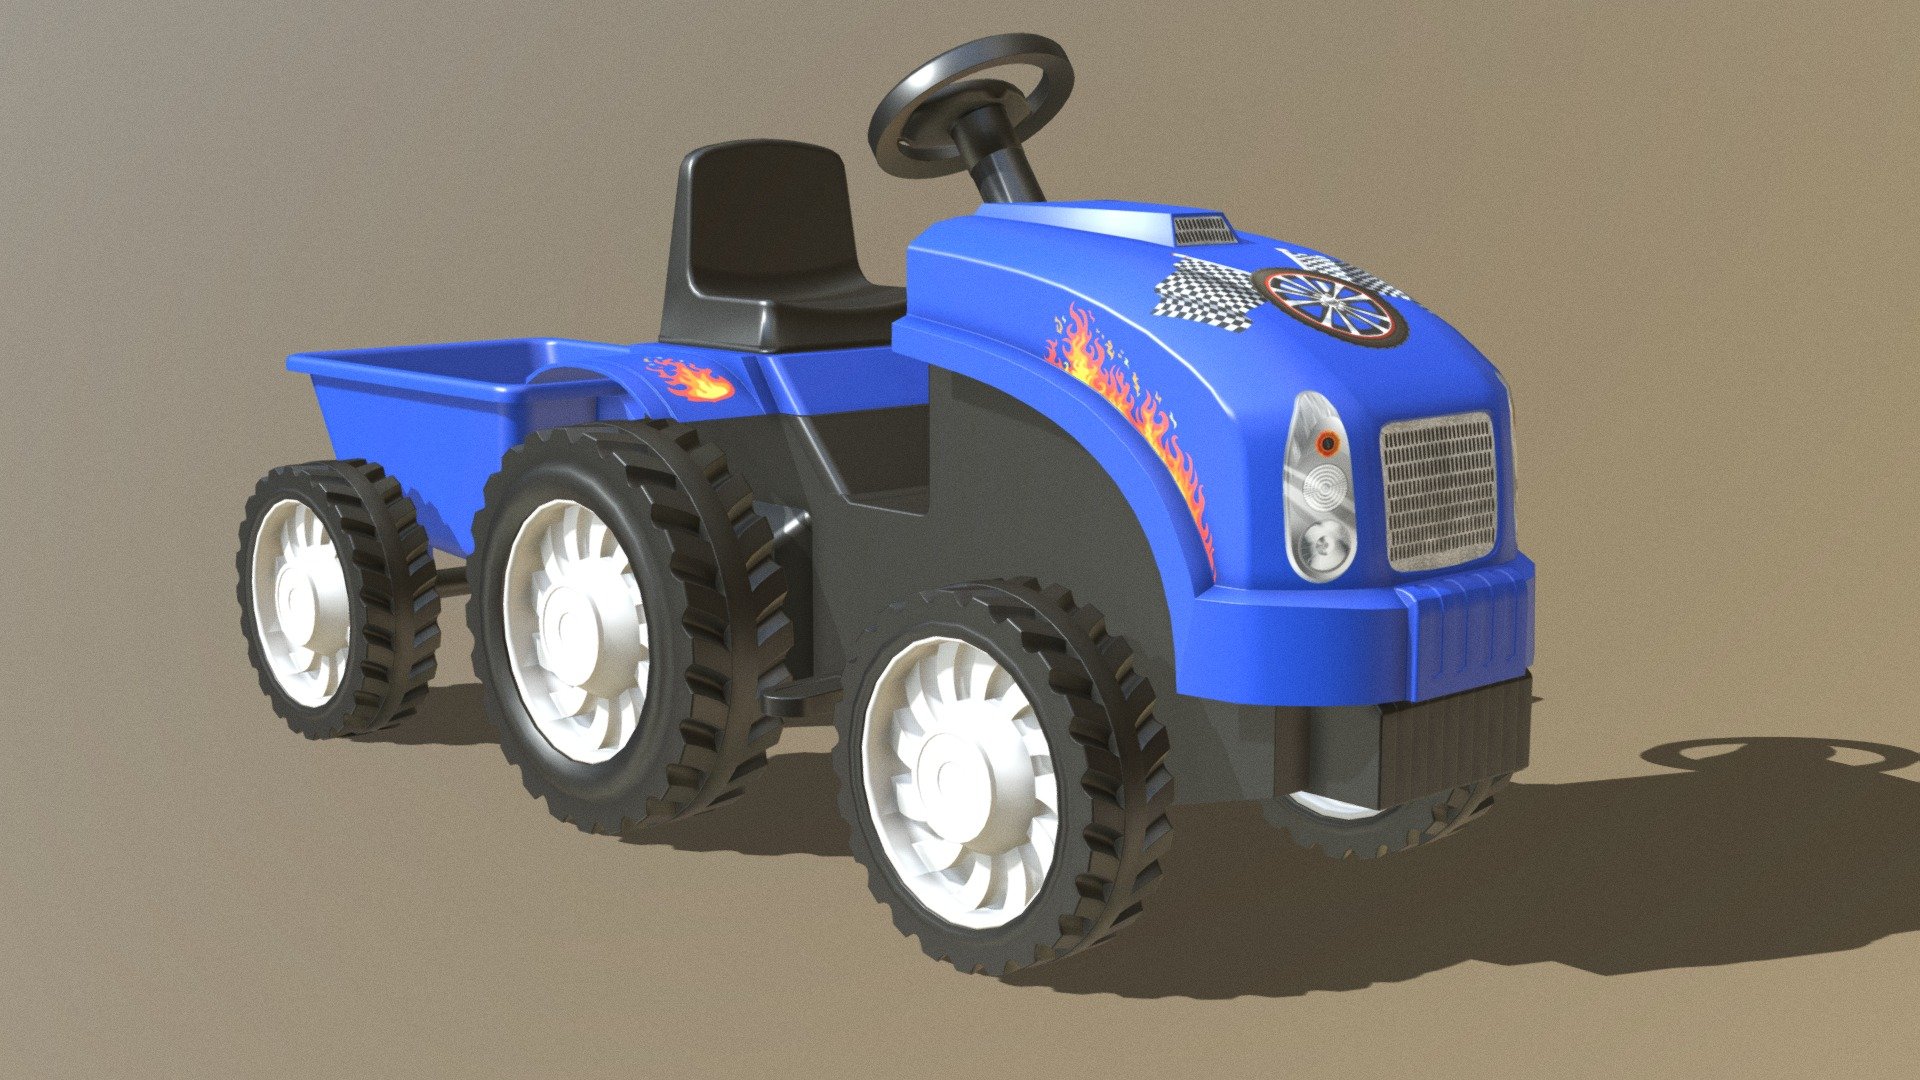 This is a very interesting trailer-car toy for kids

3D Model information:

Game-ready high quality asset (75k triangles)

The model was made in a Low poly workflow 3d model